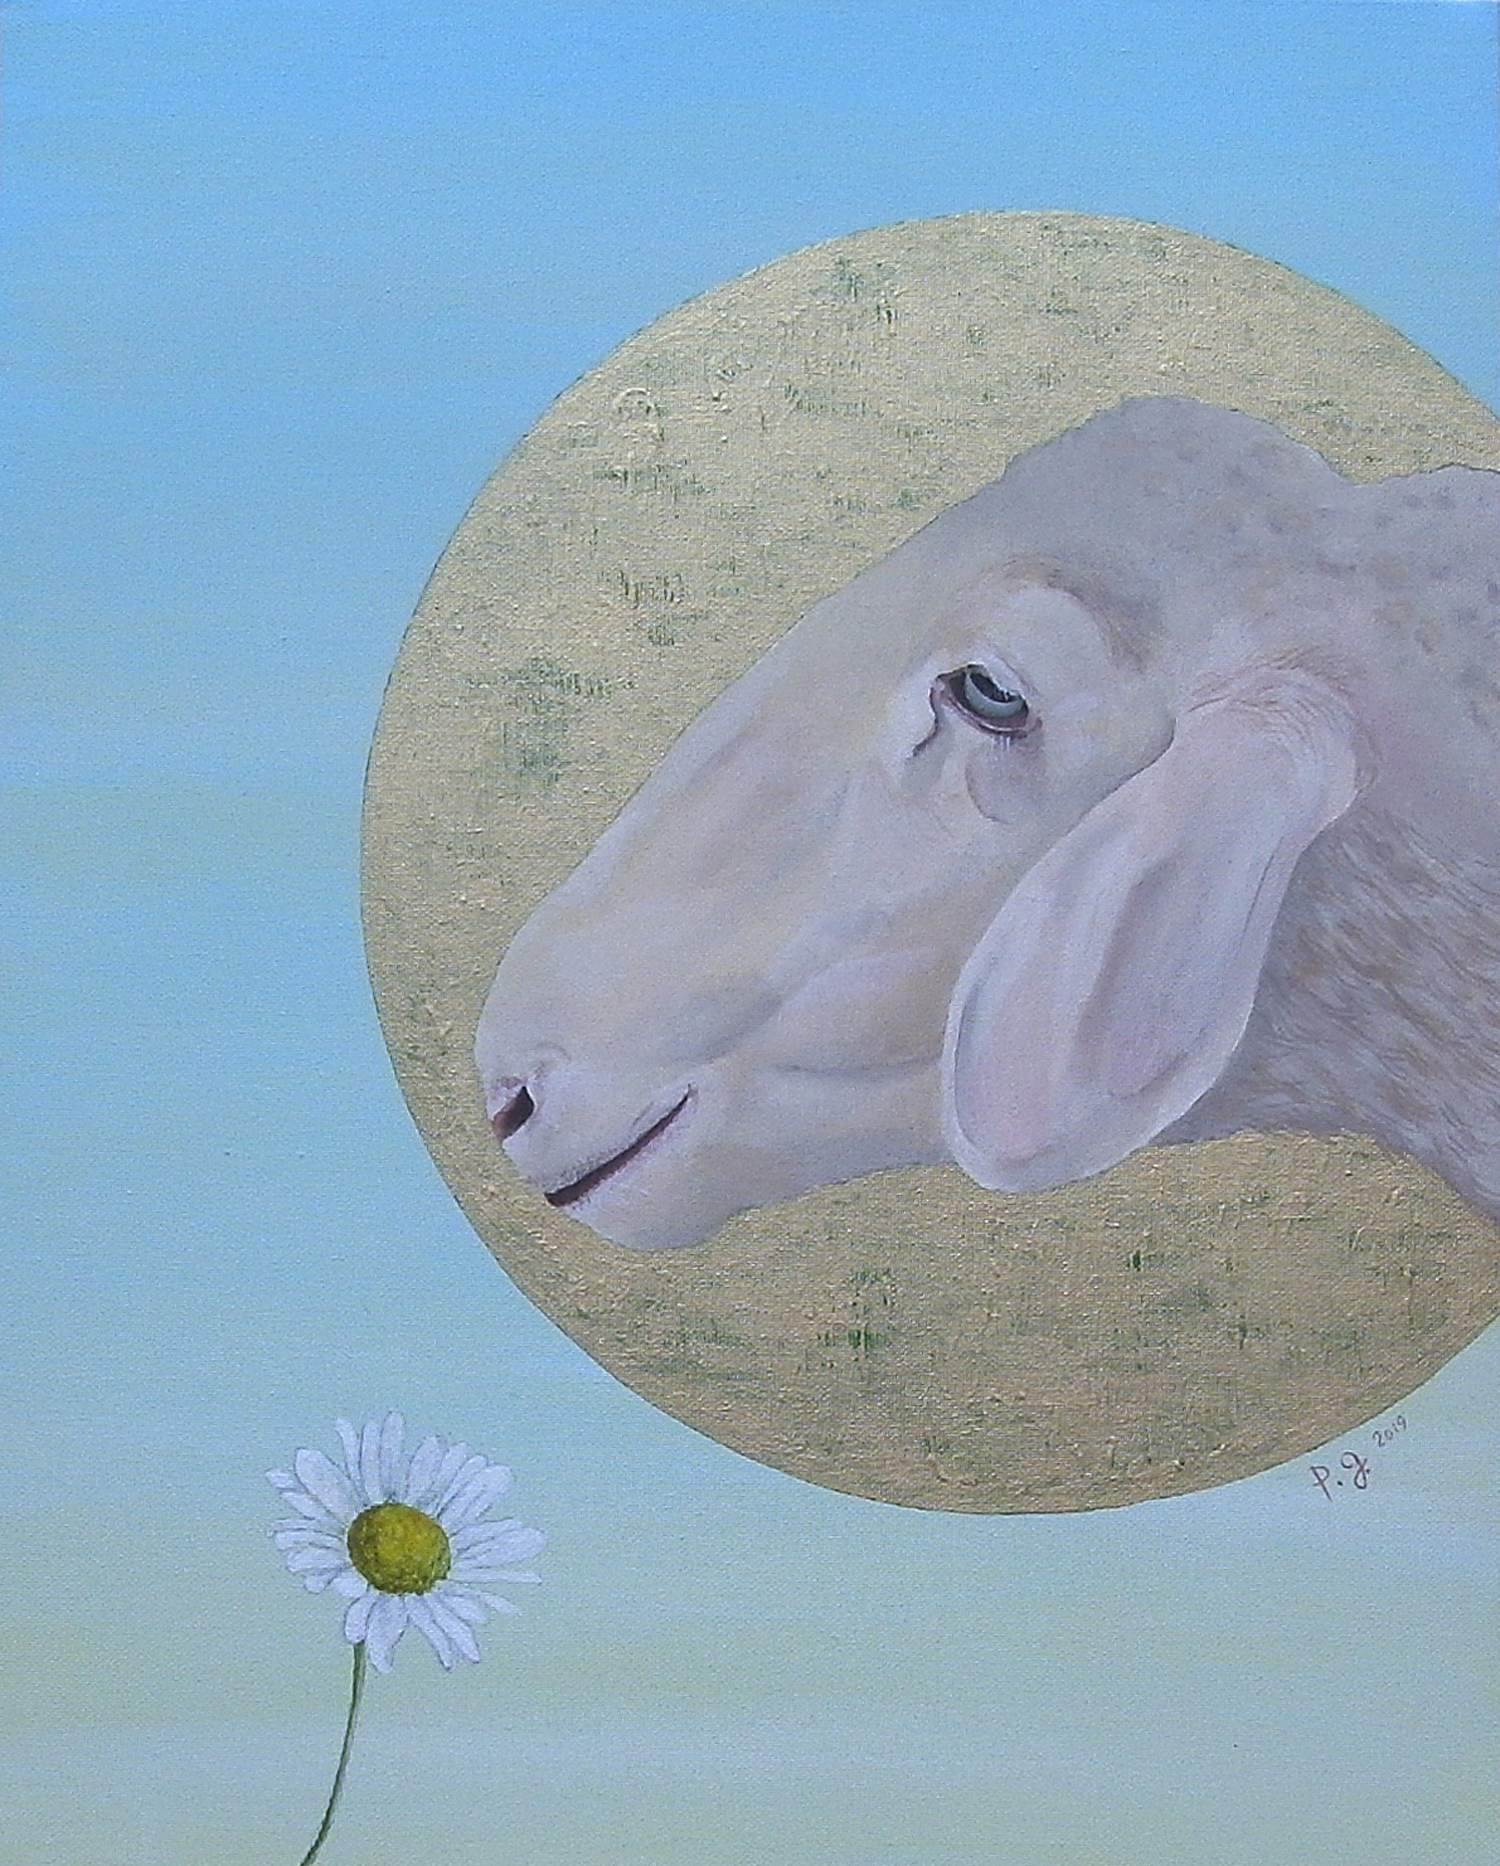 patrick gourgouillat - "Sheep And The Last Daisy On The Planet [Animals]" - 2019